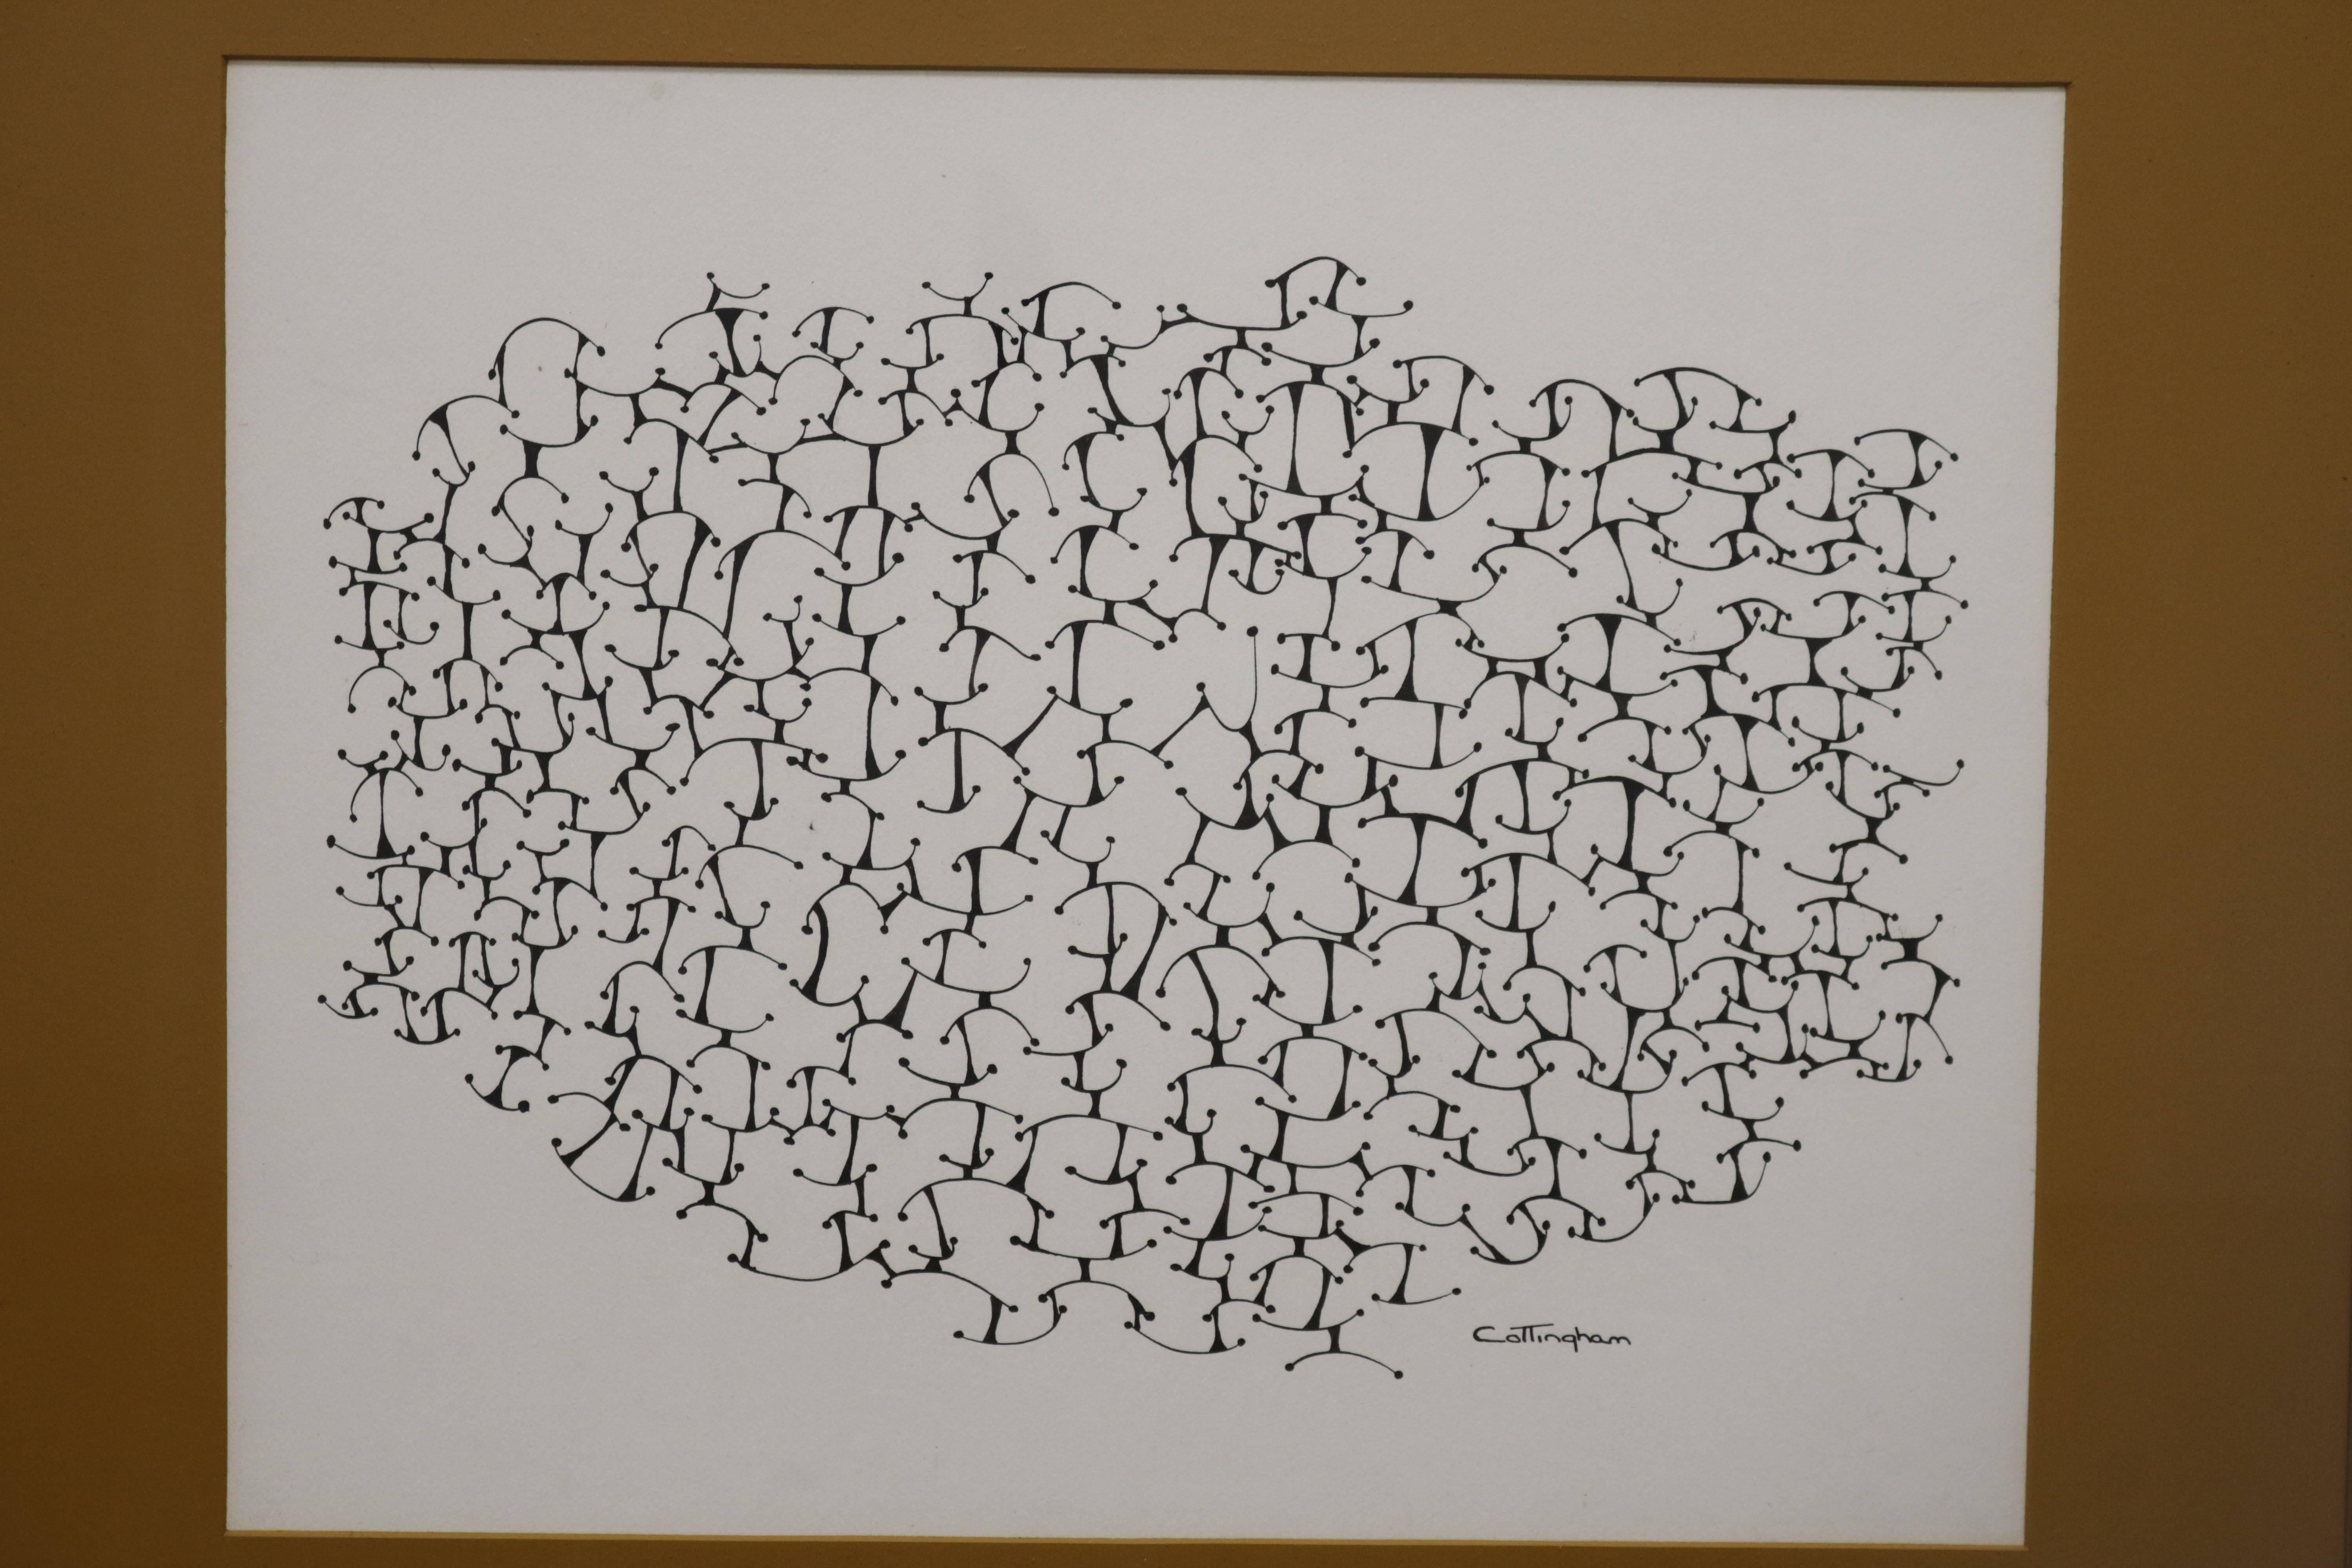 Framed lithograph depicts hundreds of figures in different compositions, each one connected to at least one other, forming a sort of stylized web. Signed "Cottingham" (printed in the image).